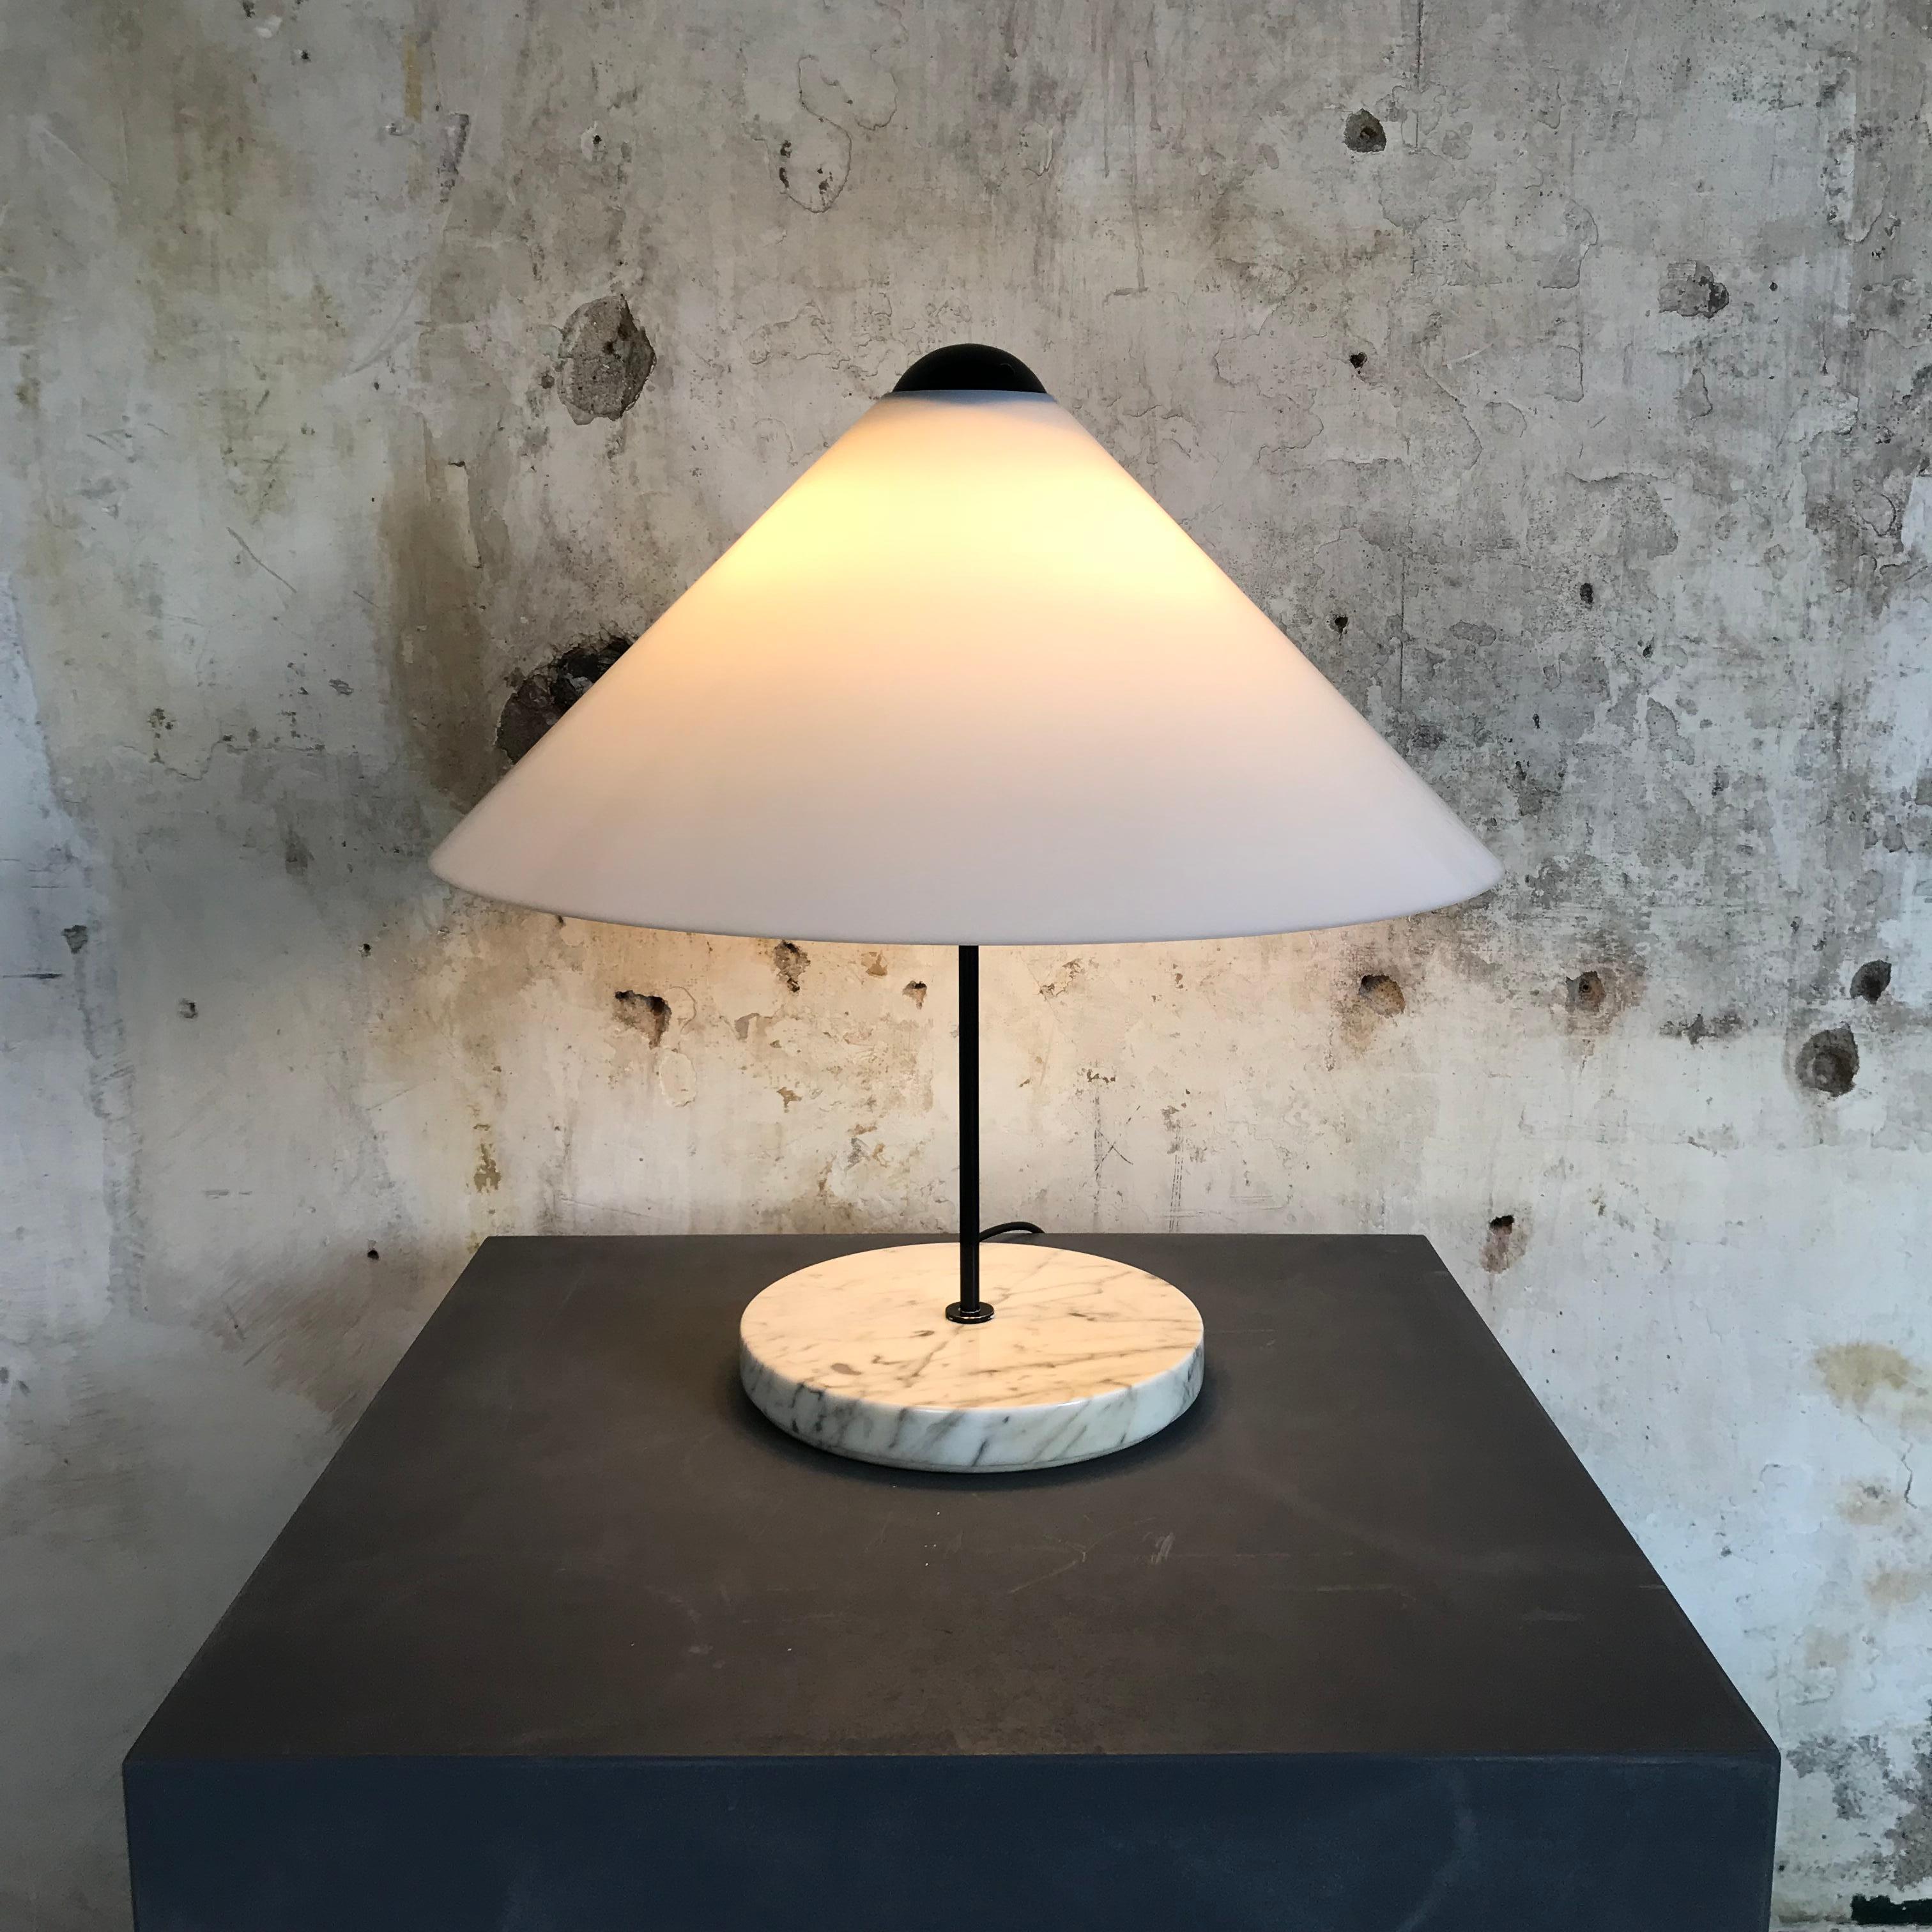 This deceptively simplistic lamp is from the ‘Snow’ series and was only in production for a very short period. This lamp has an opaque white Perspex acrylic shade which is suspended from a blackened metal orb. It has two light sockets (E27) and a